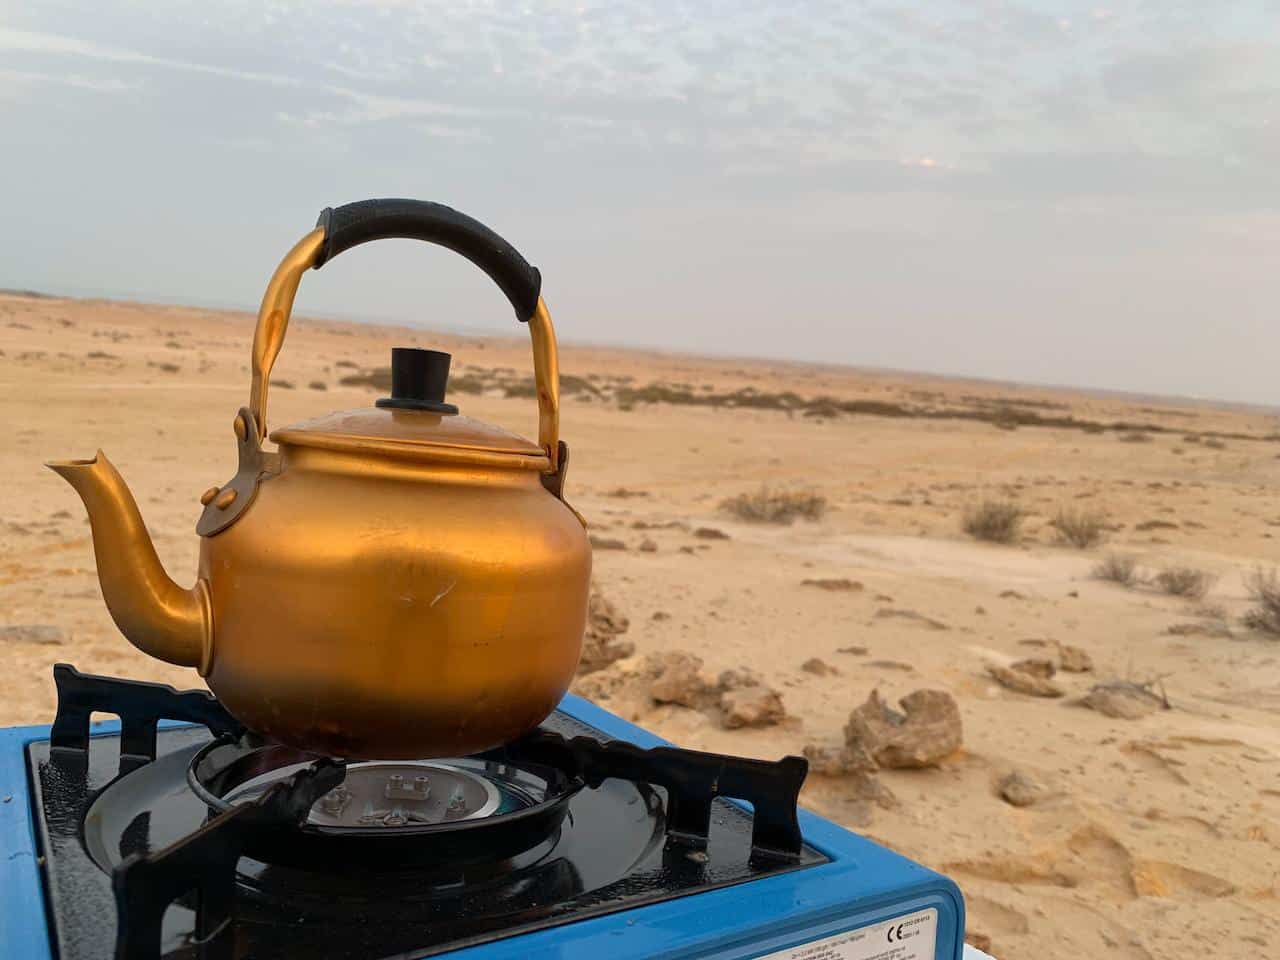 Camping kettle on gas cooker